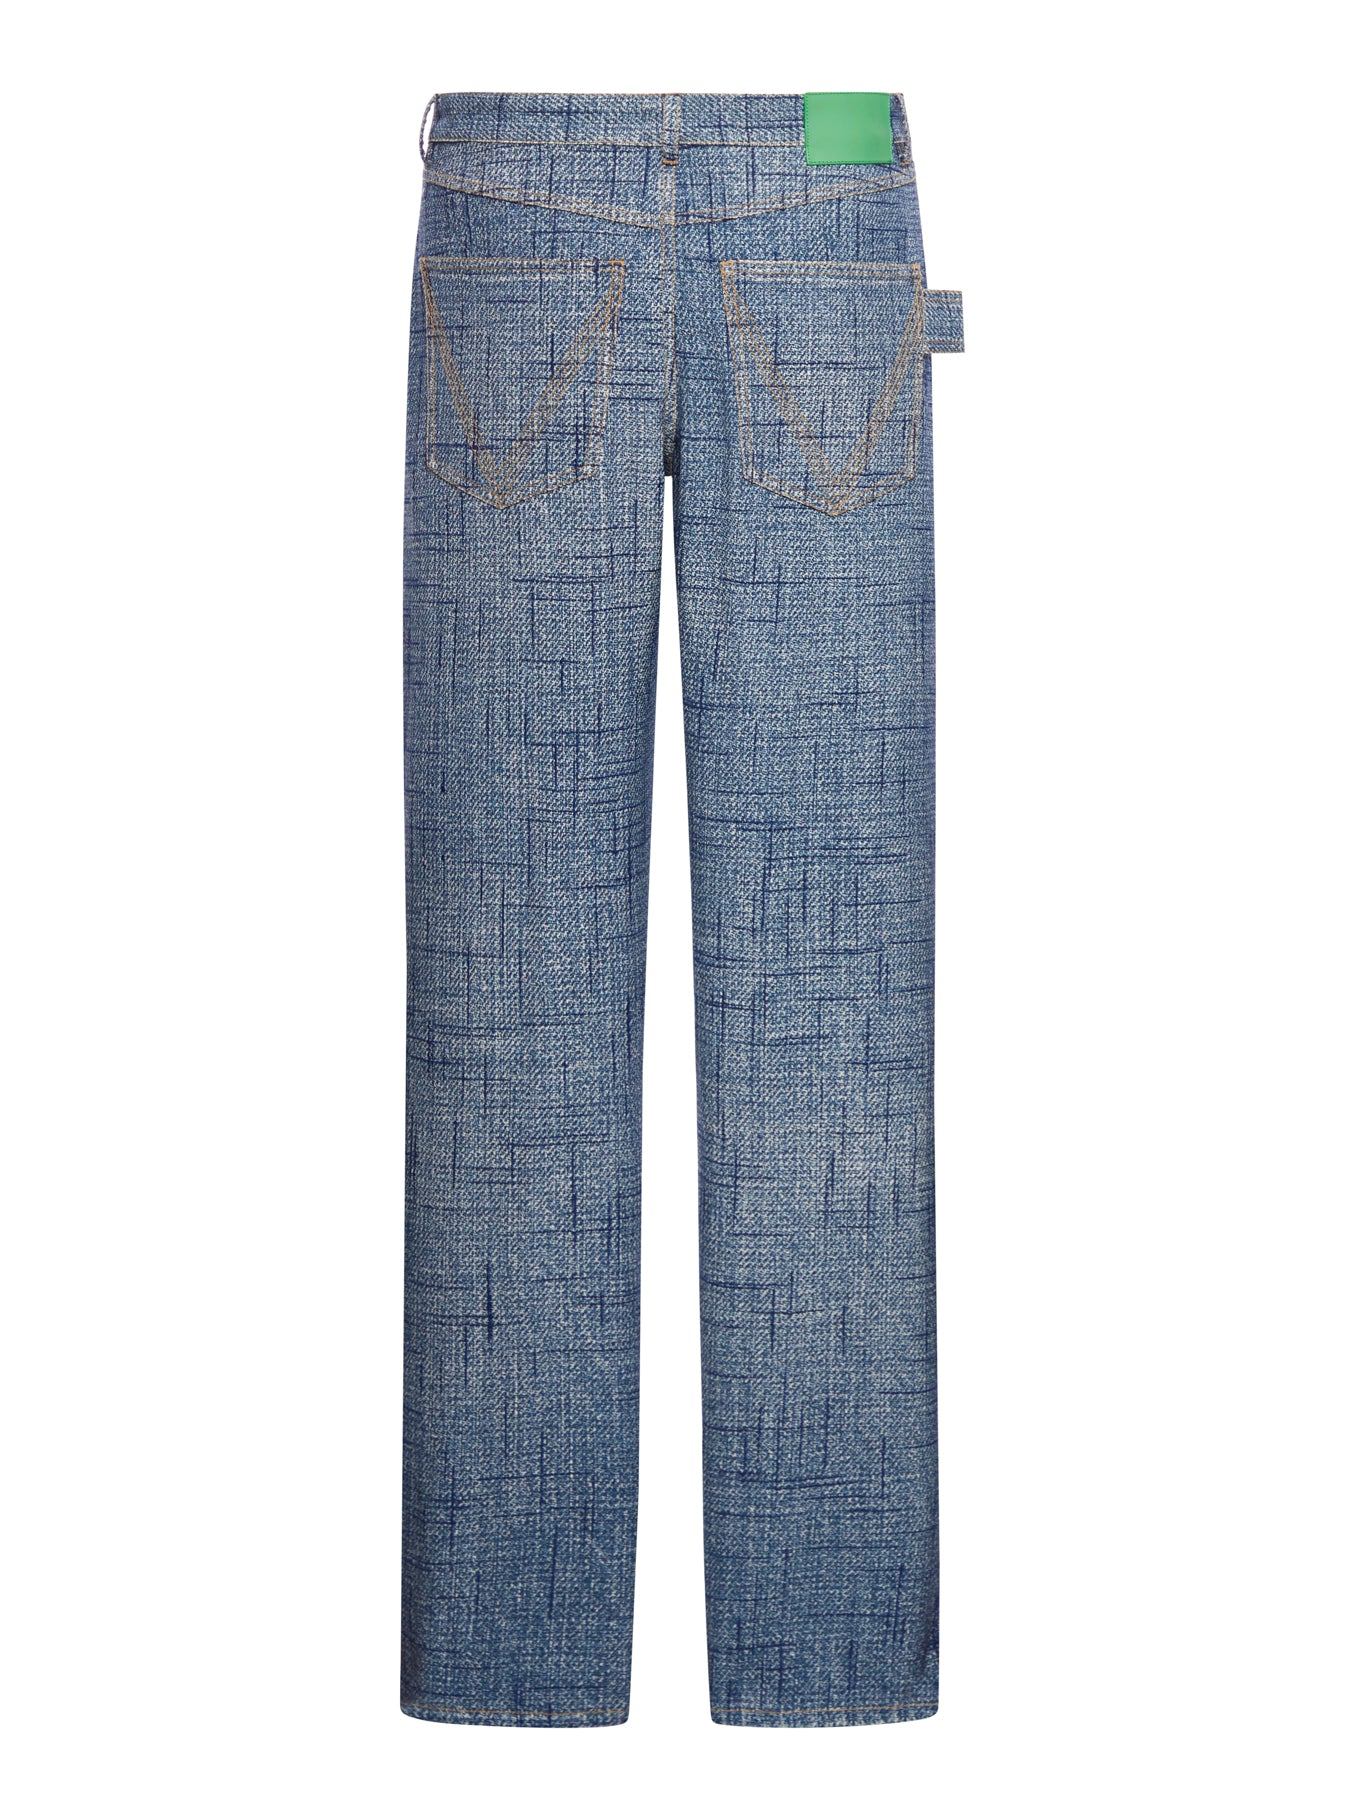 Viscose trousers with denim texture